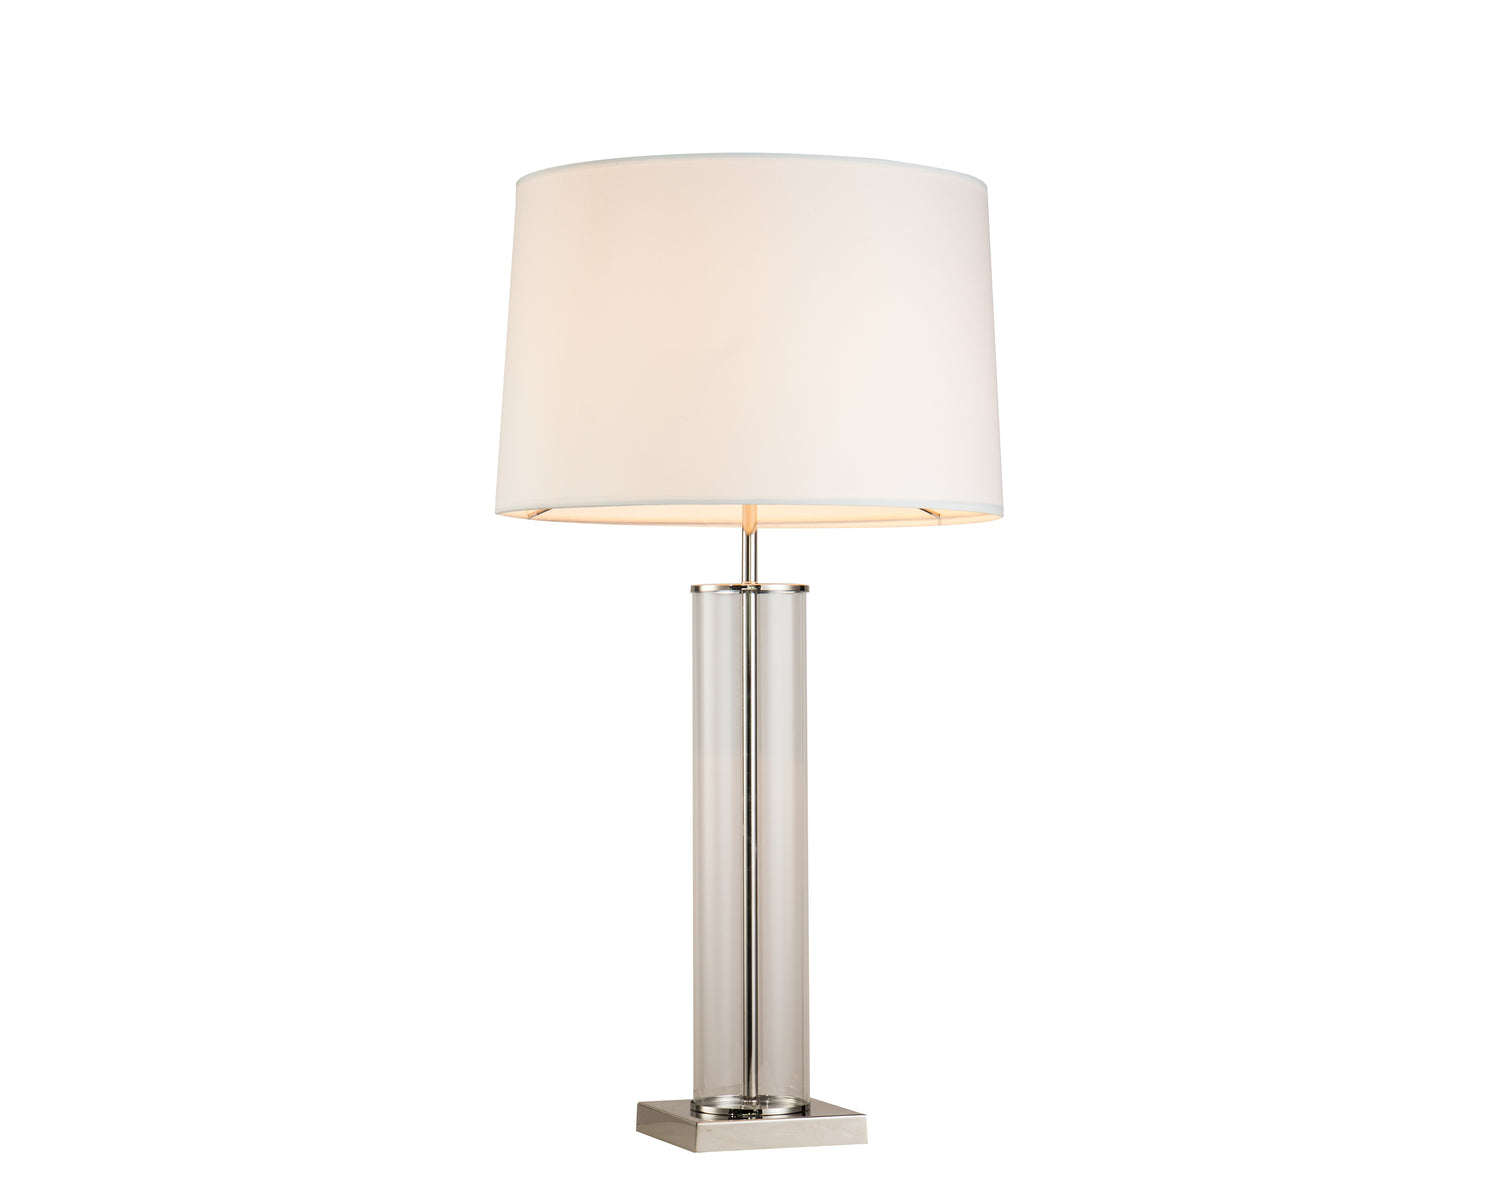  LiangAndEimil-Liang & Eimil Norman Table Lamp Nickel-Silver 33 